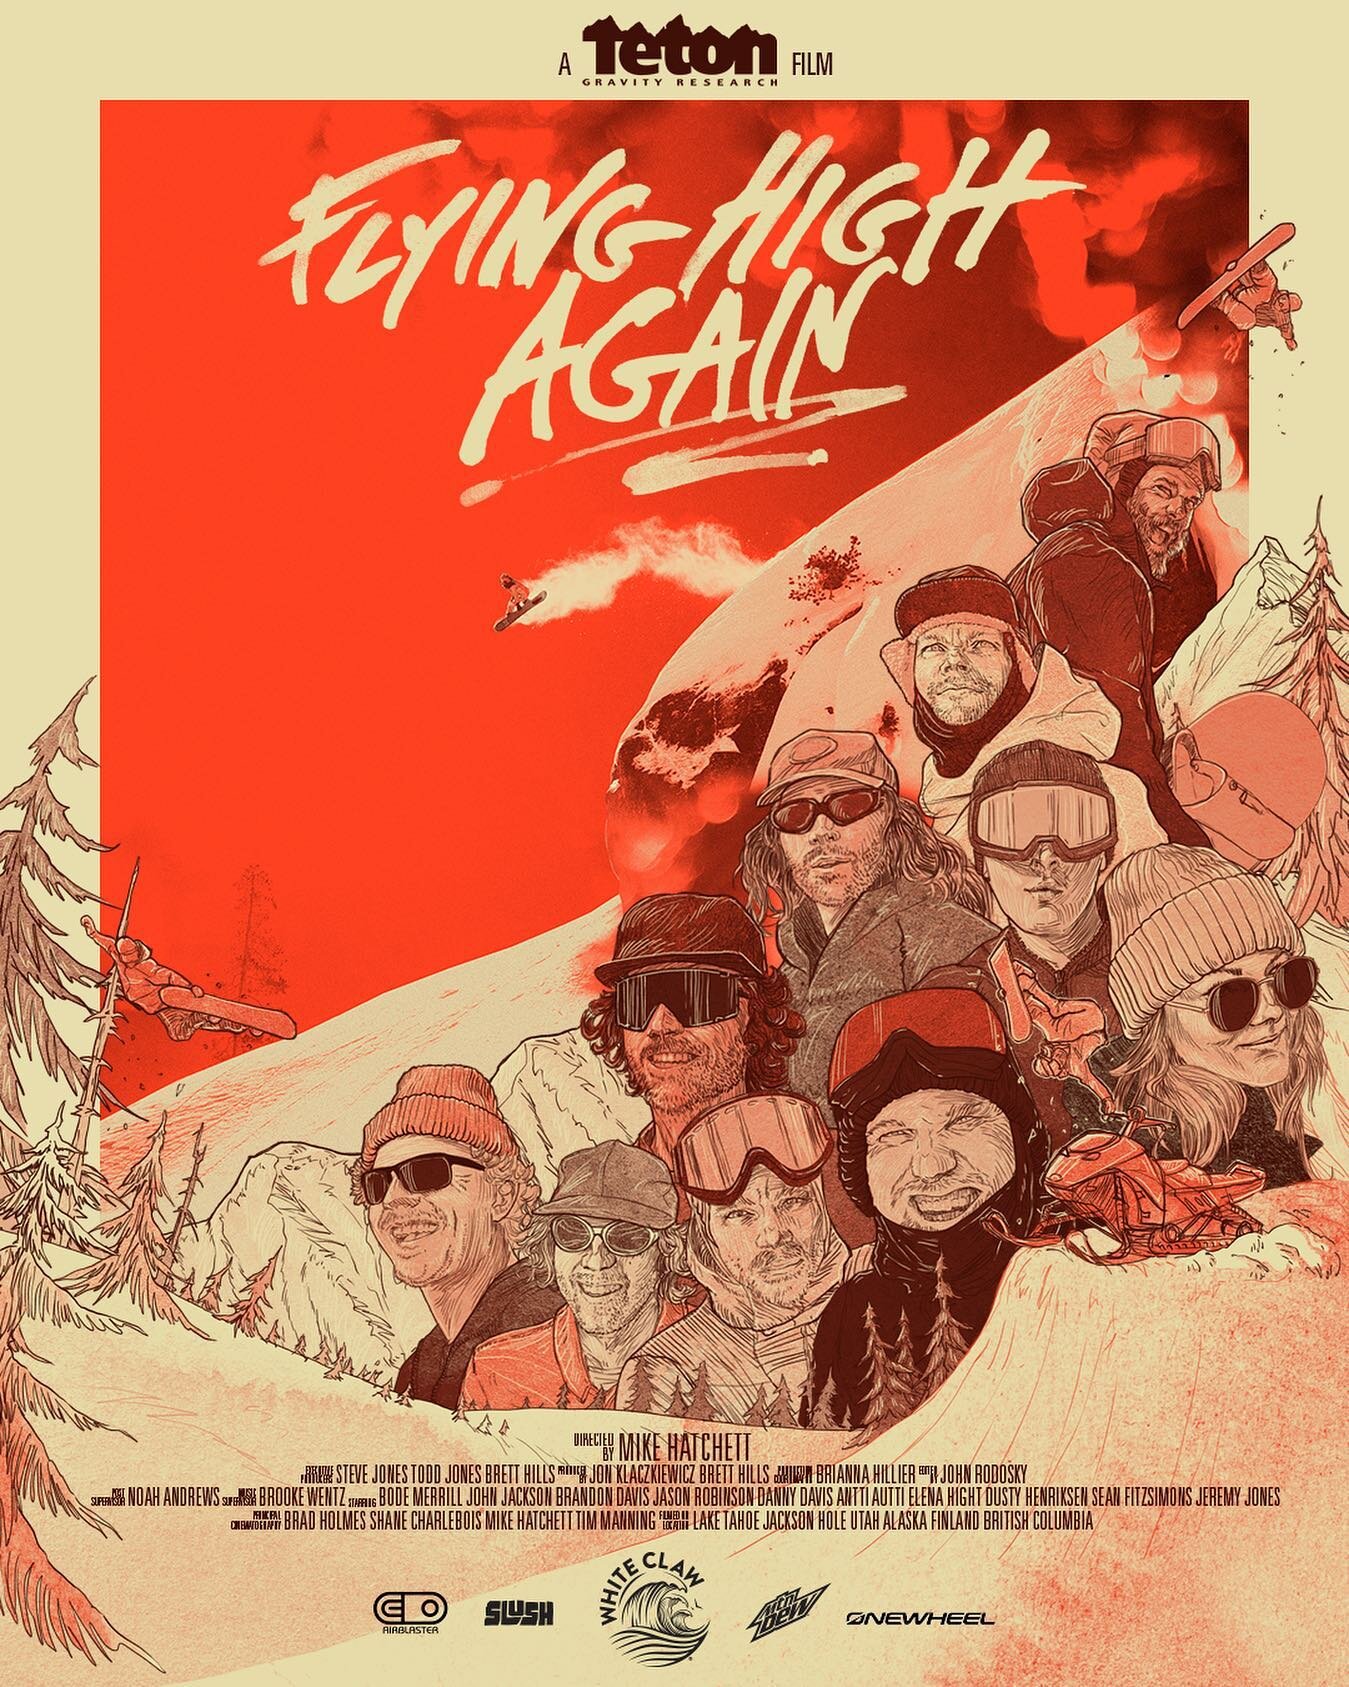 I&rsquo;m really stoked to have been asked to design the movie poster for the upcoming @tetongravity snowboard movie, Flying High Again, directed by the legendary Mike Hatchett. The first snowboard movie that I ever owned on VHS was TB8, so it&rsquo;